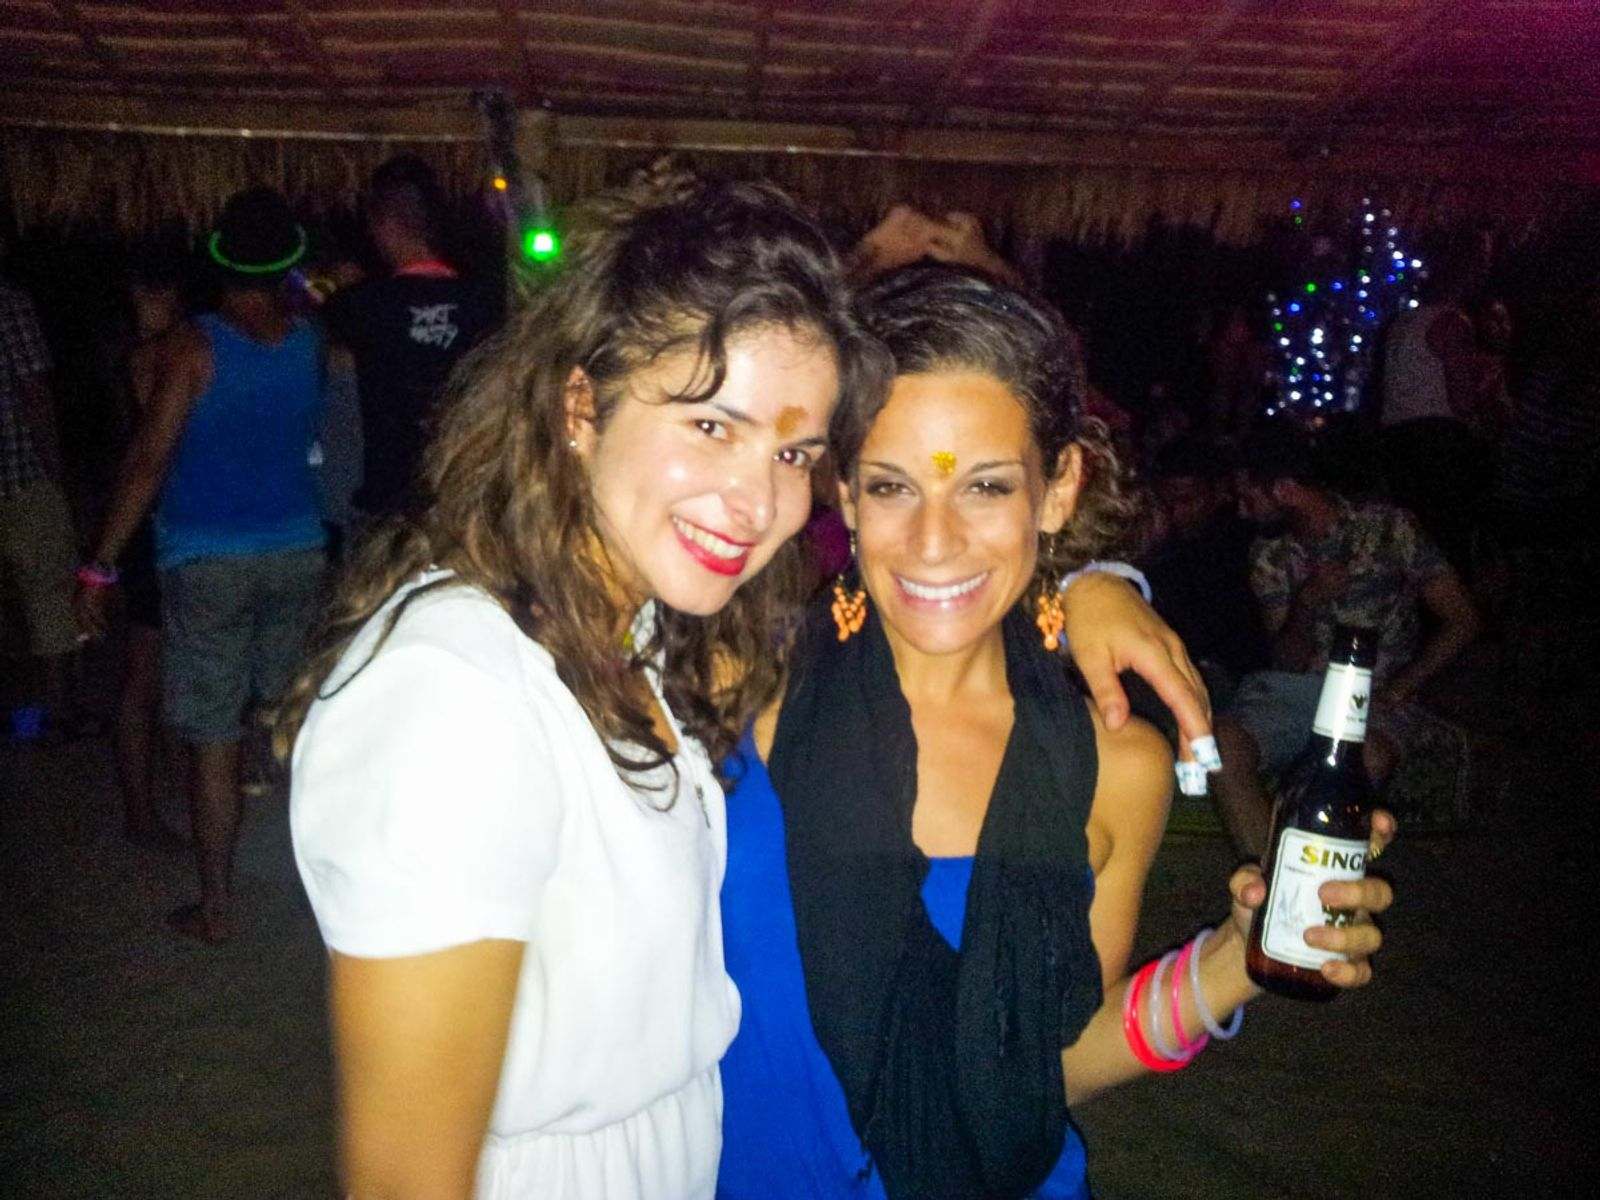 Two women smiling at camera at New Years Eve party in Koh Lanta.